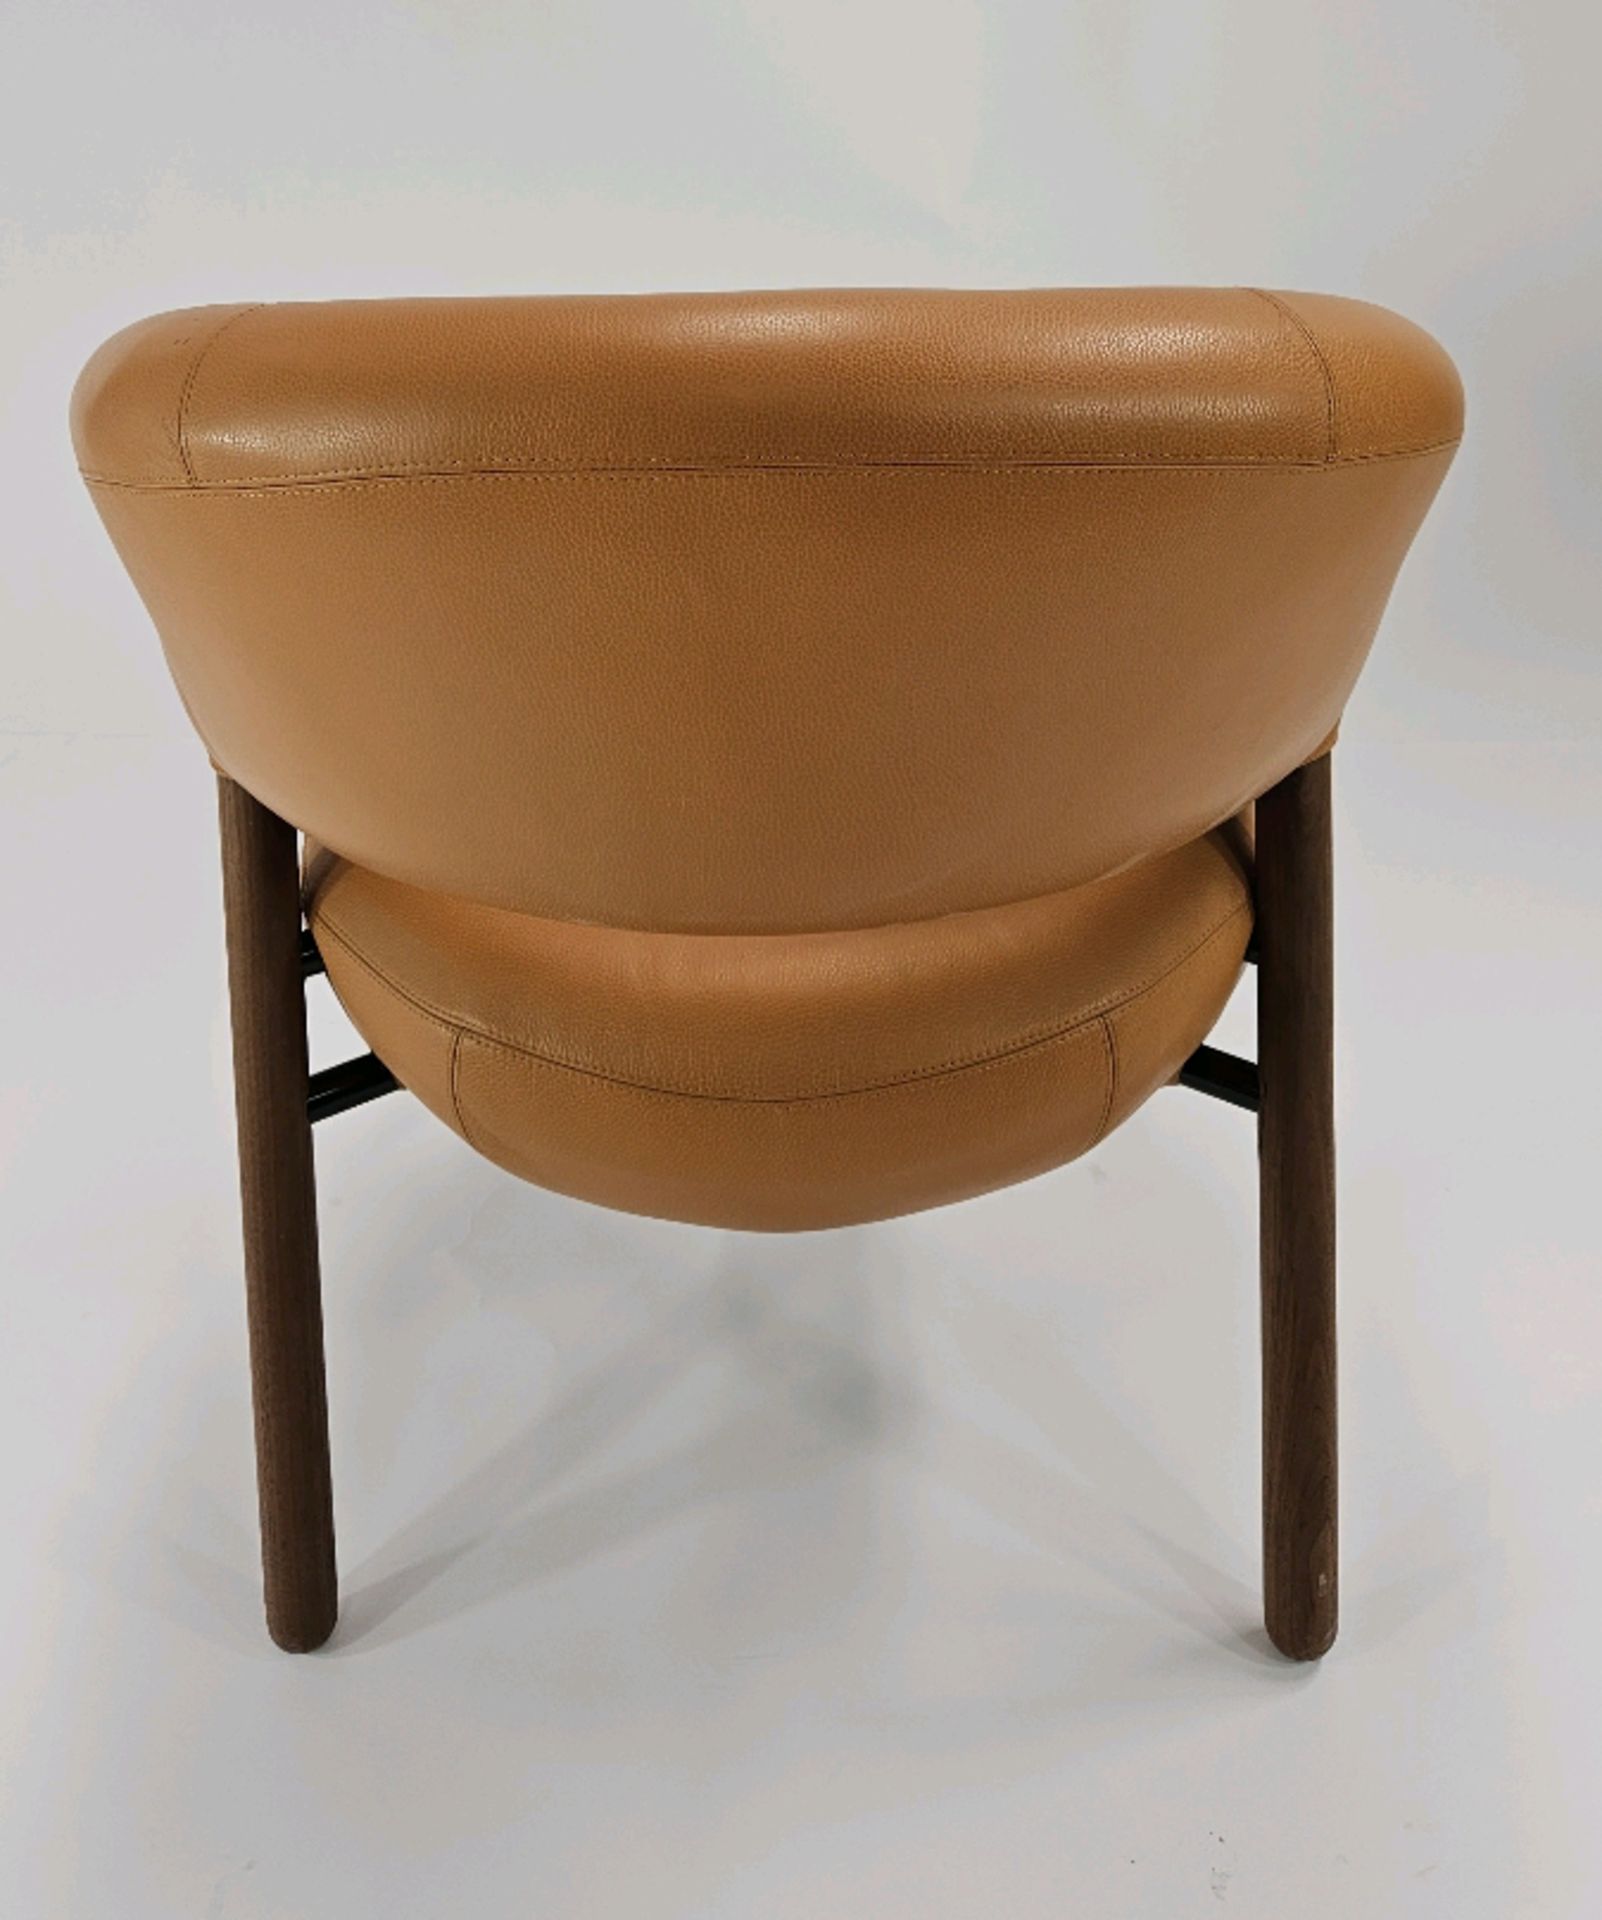 Modern Century Leather Chair - Image 3 of 3